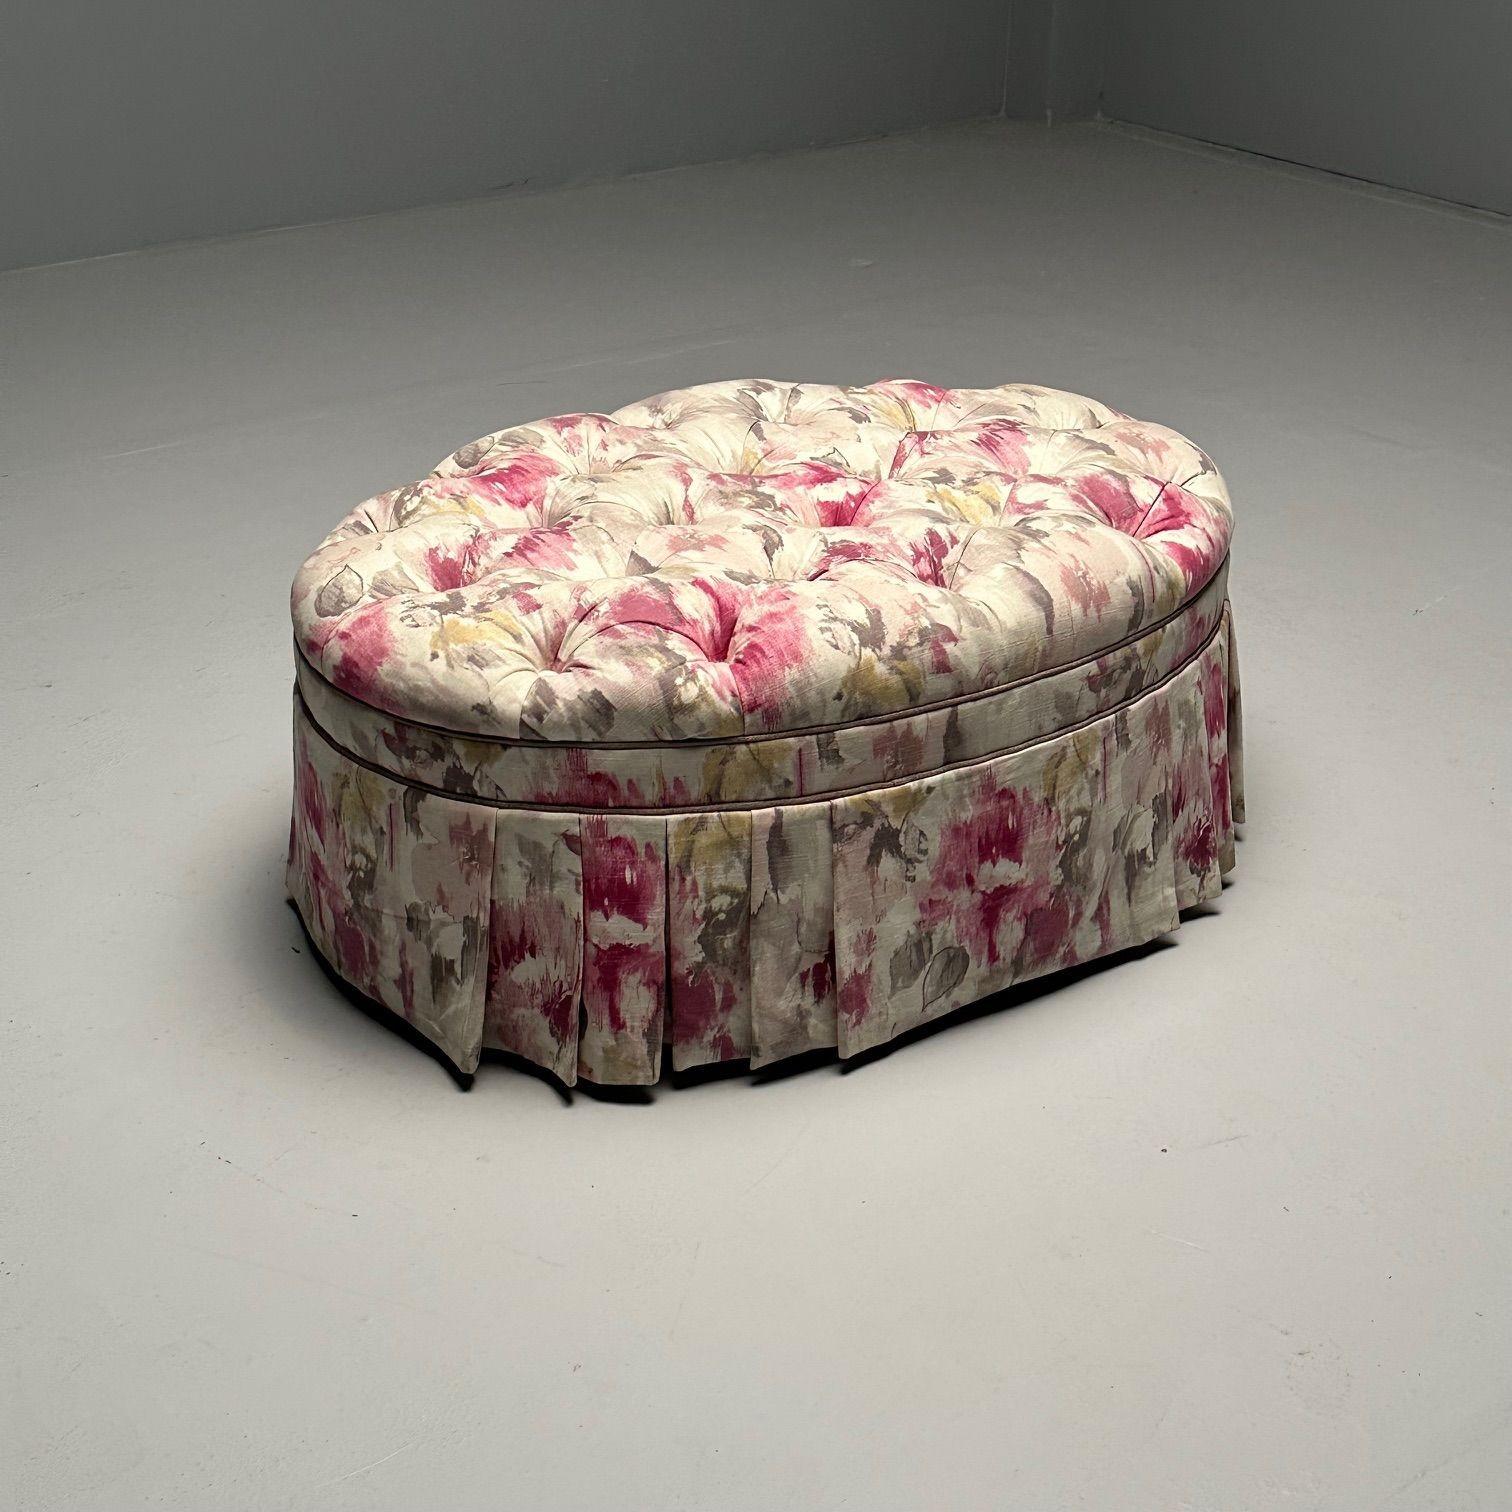 Traditional, Oval Tufted Ottoman or Pouf, Tie Dye Floral Fabric, Wood, USA 2010s In Good Condition For Sale In Stamford, CT